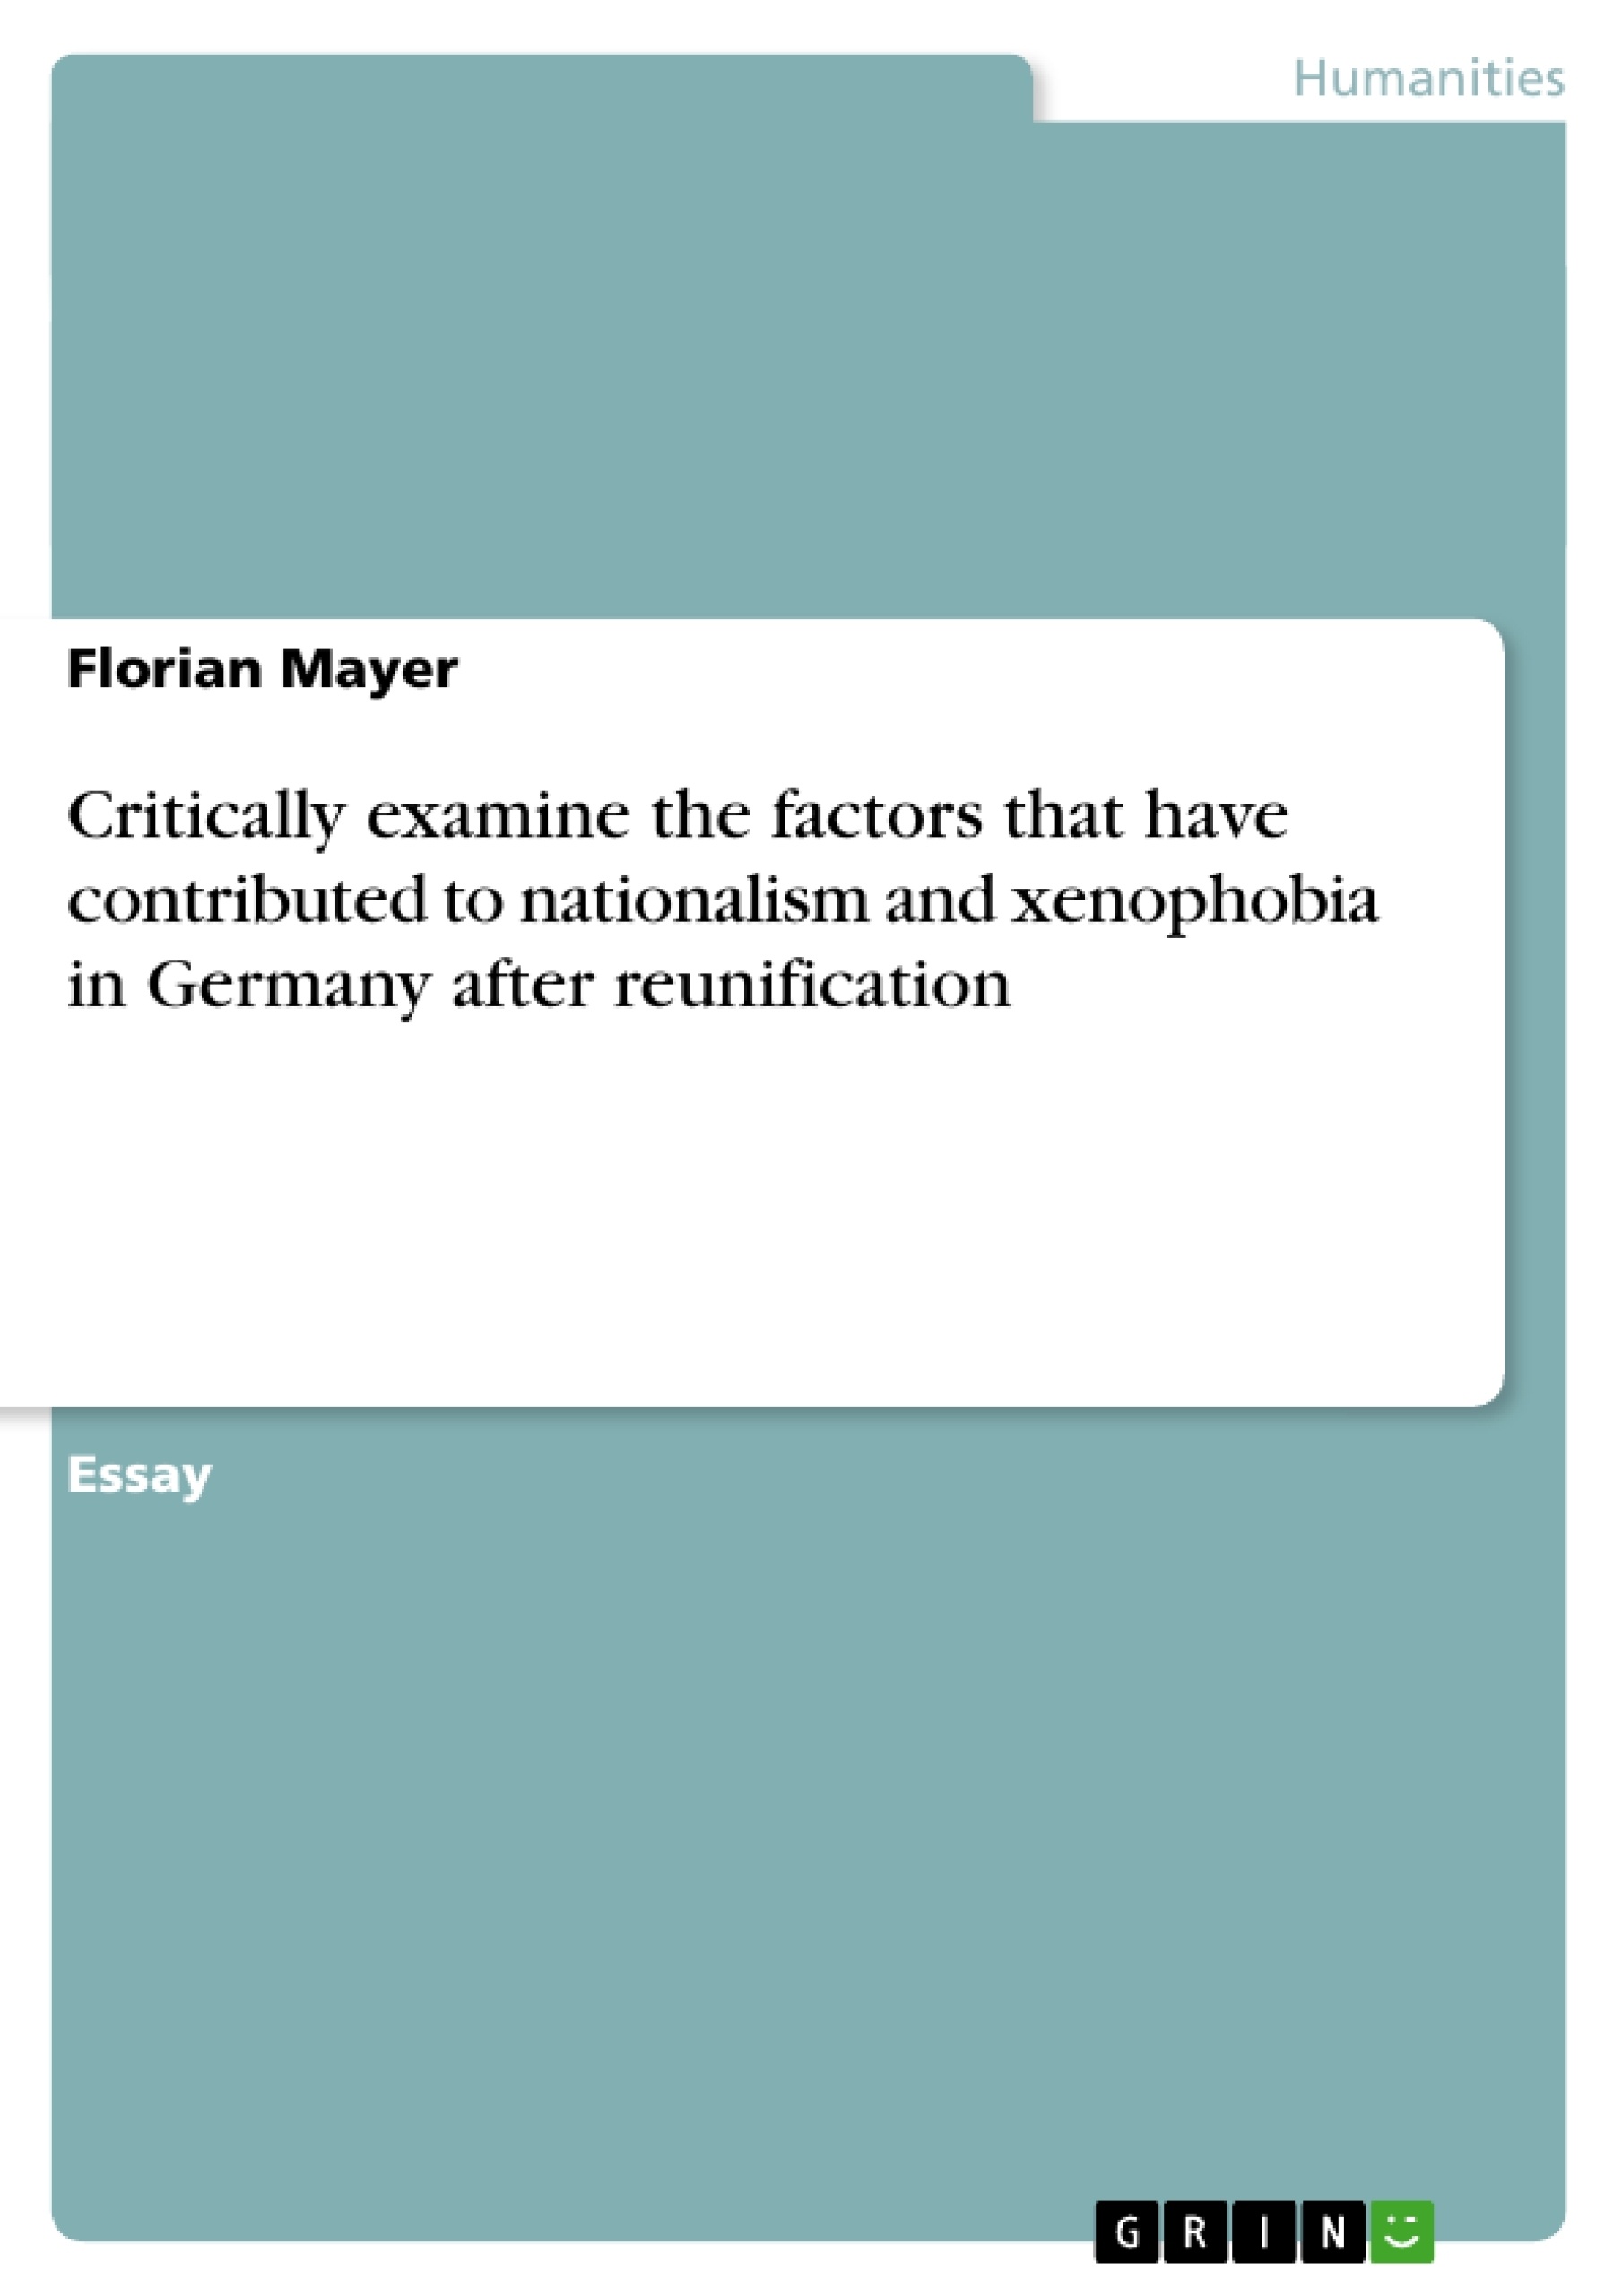 Título: Critically examine the factors that have contributed to nationalism and xenophobia in Germany after reunification